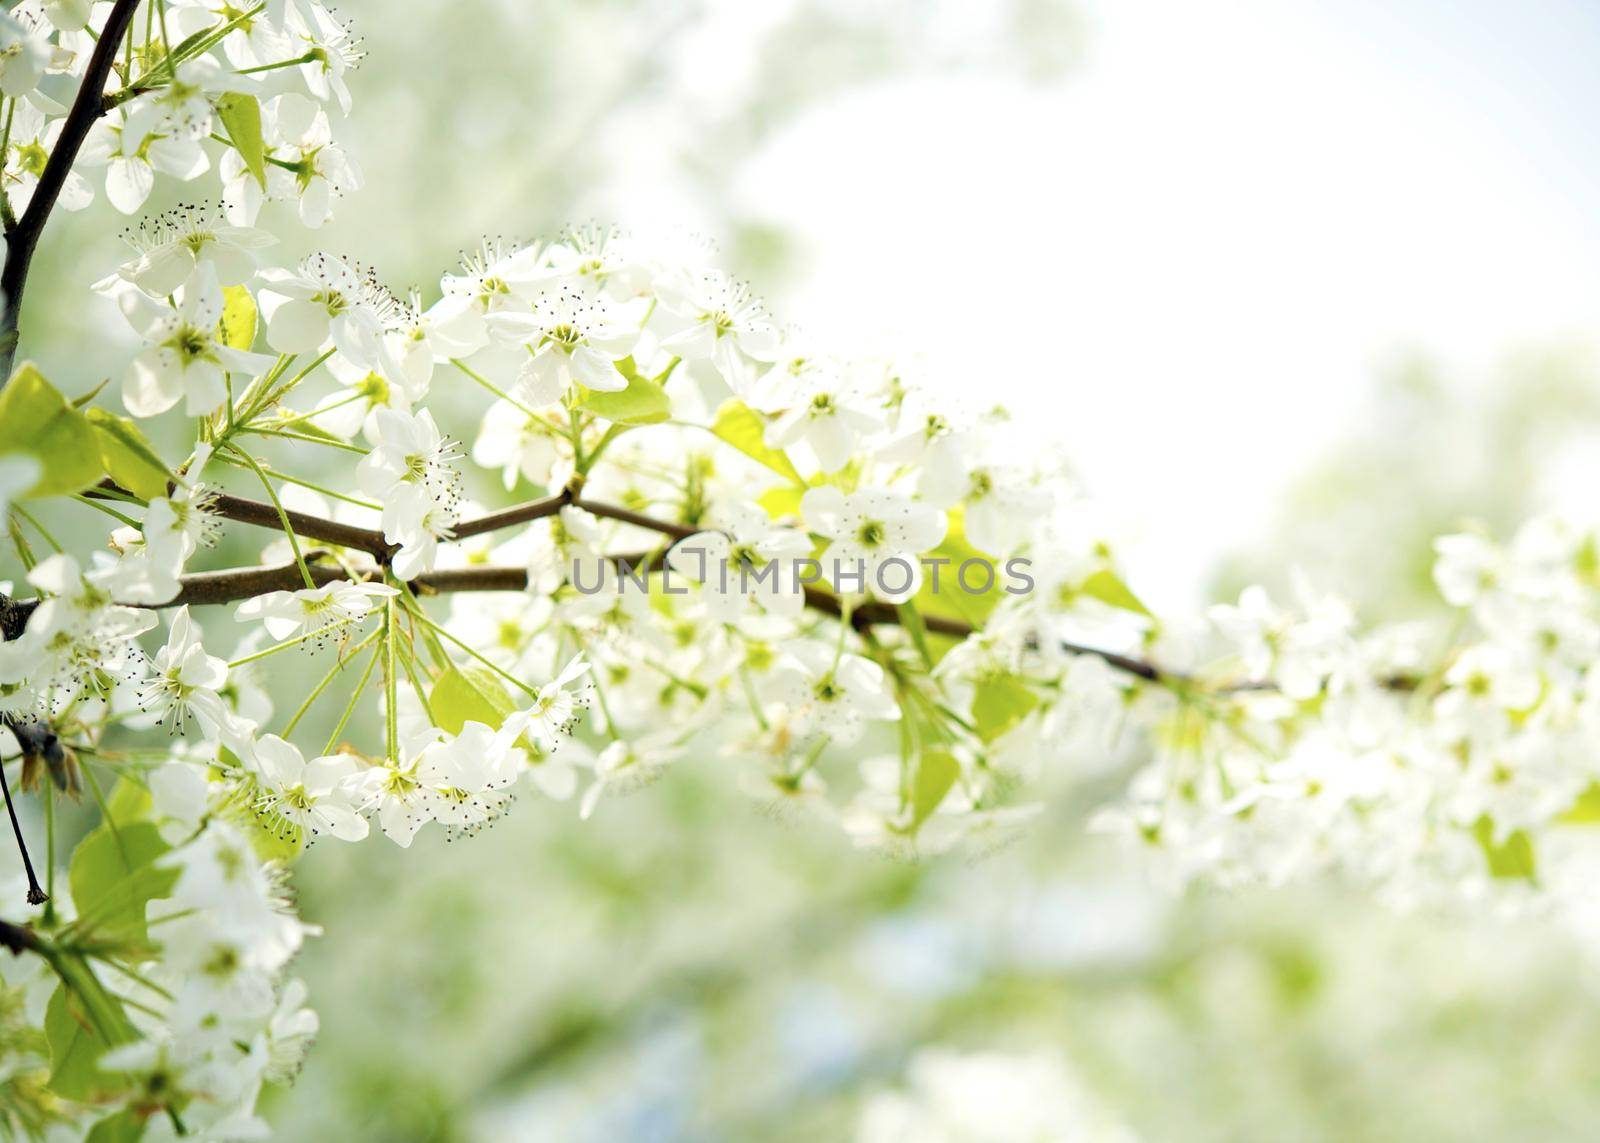 American Wild Plum - Flowering Branches. Nature Photo Collection.